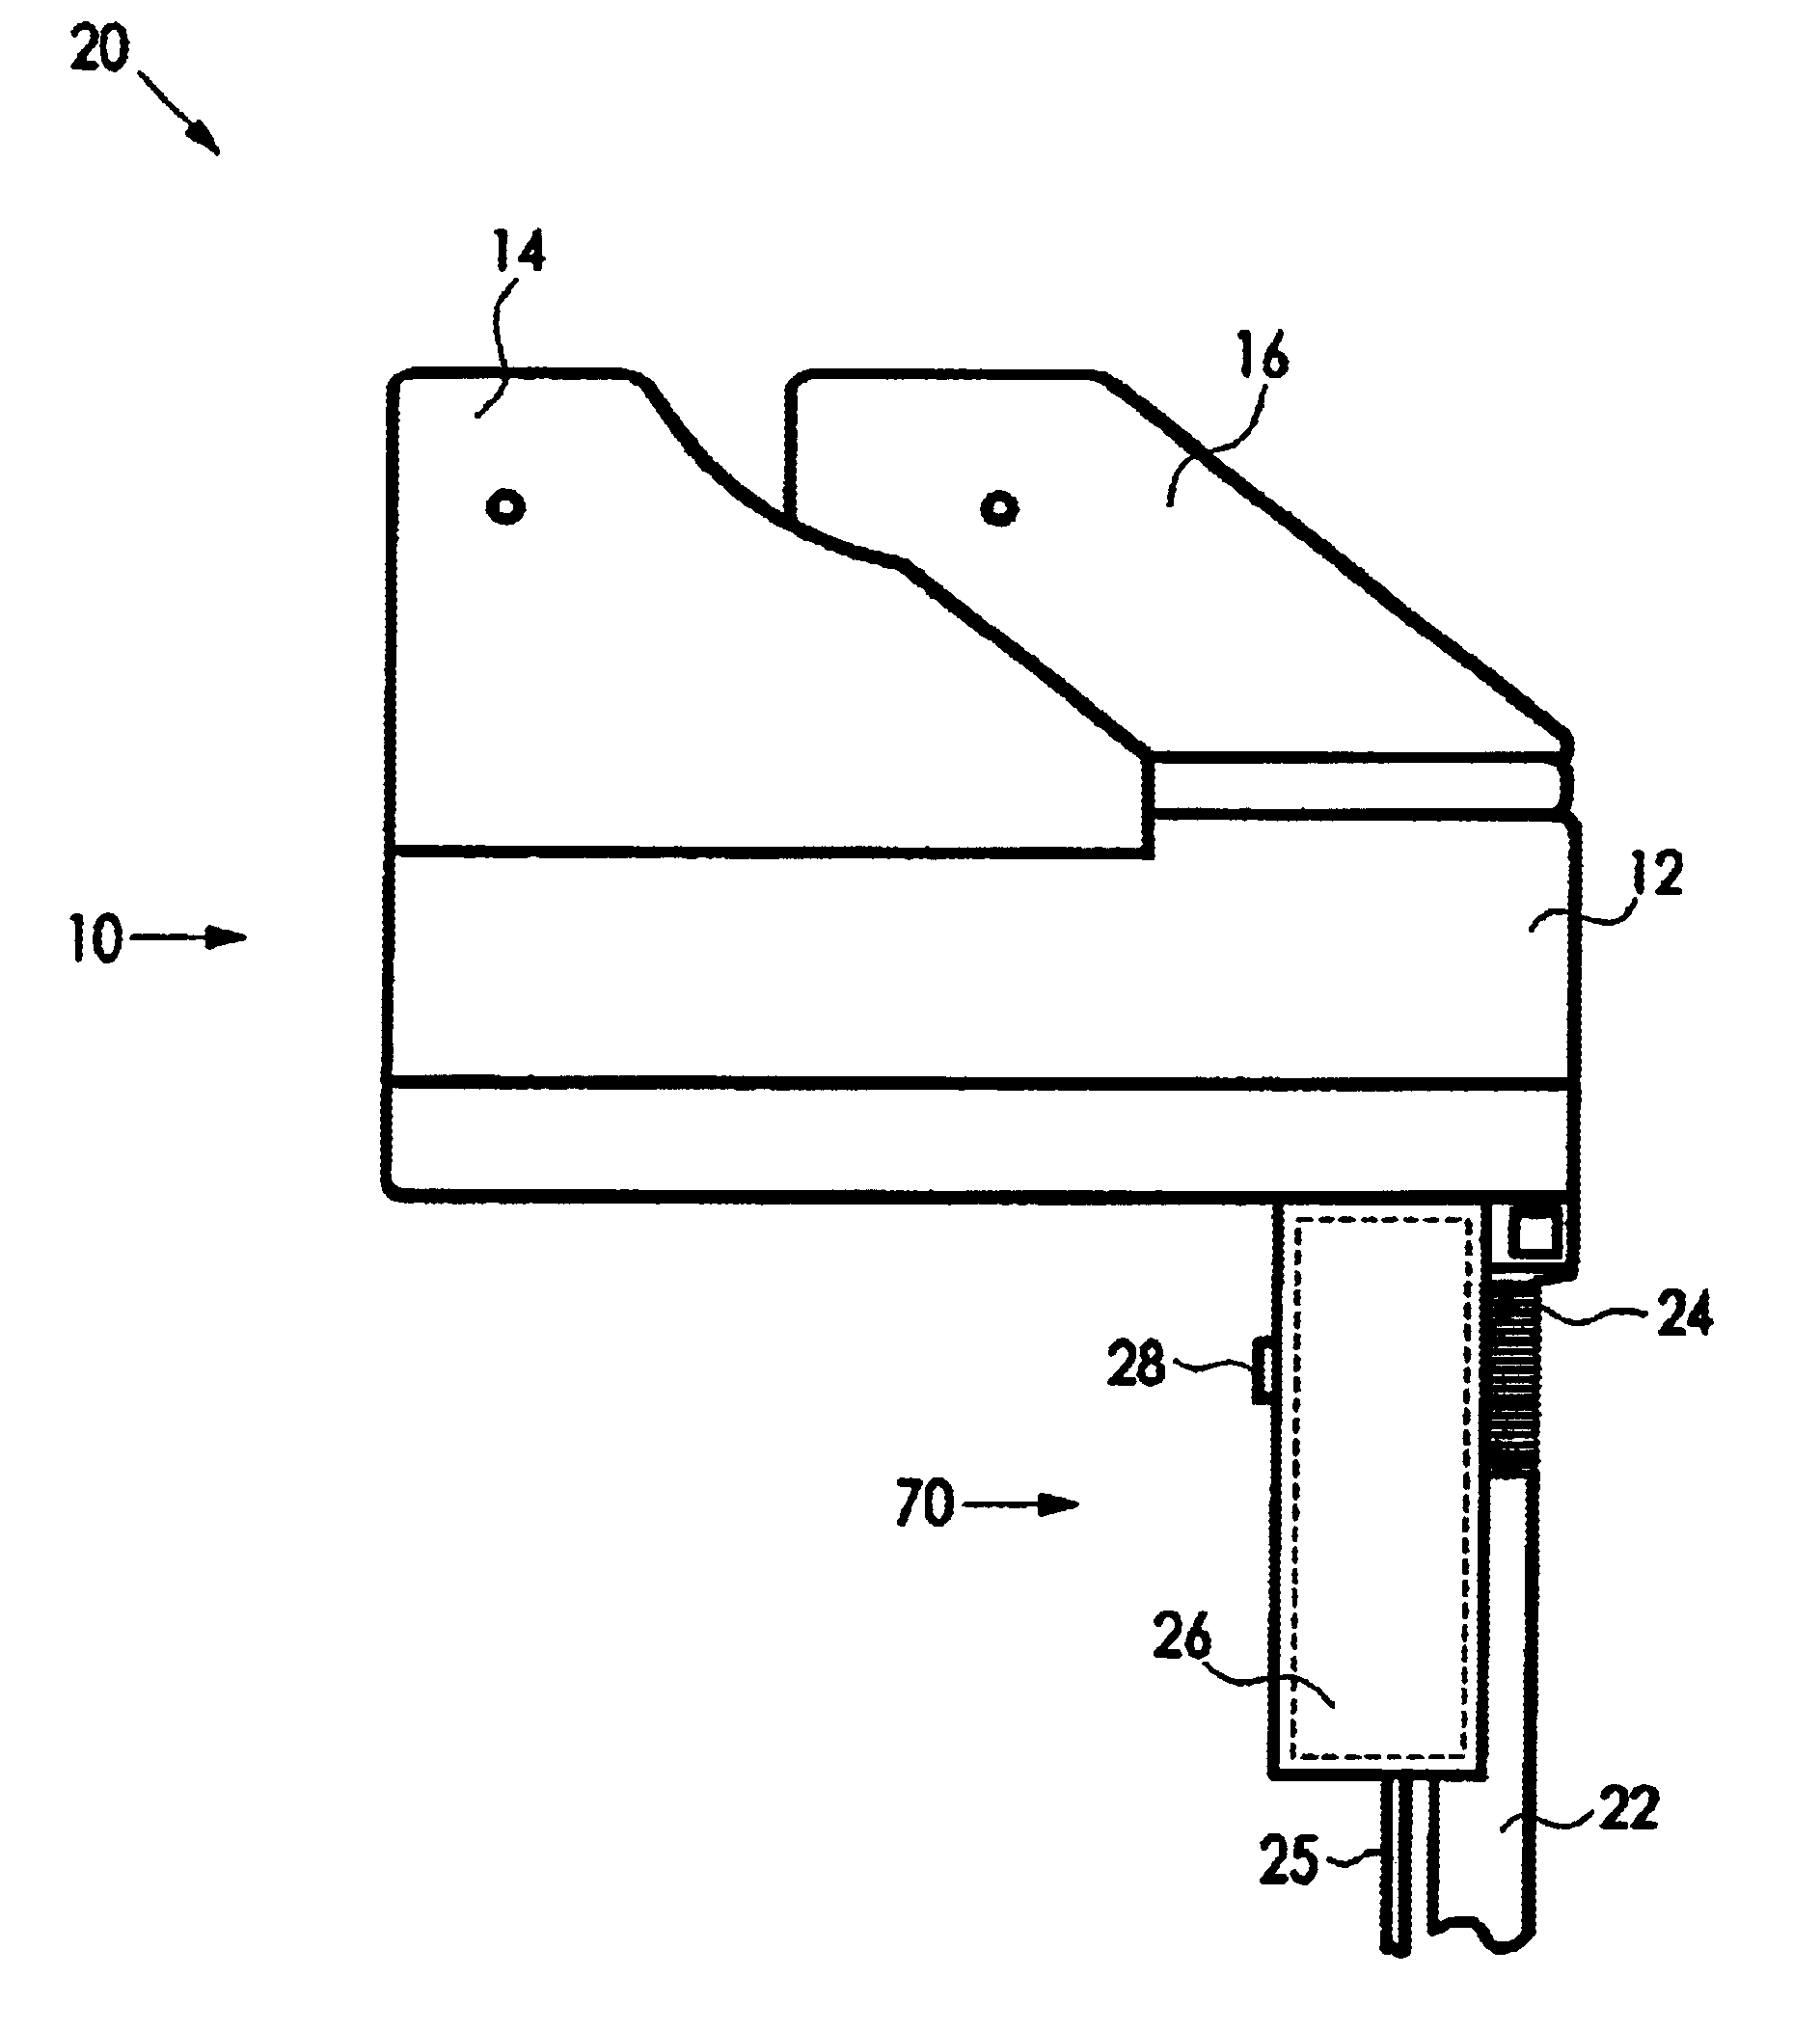 Remote actuation of installation tooling pump